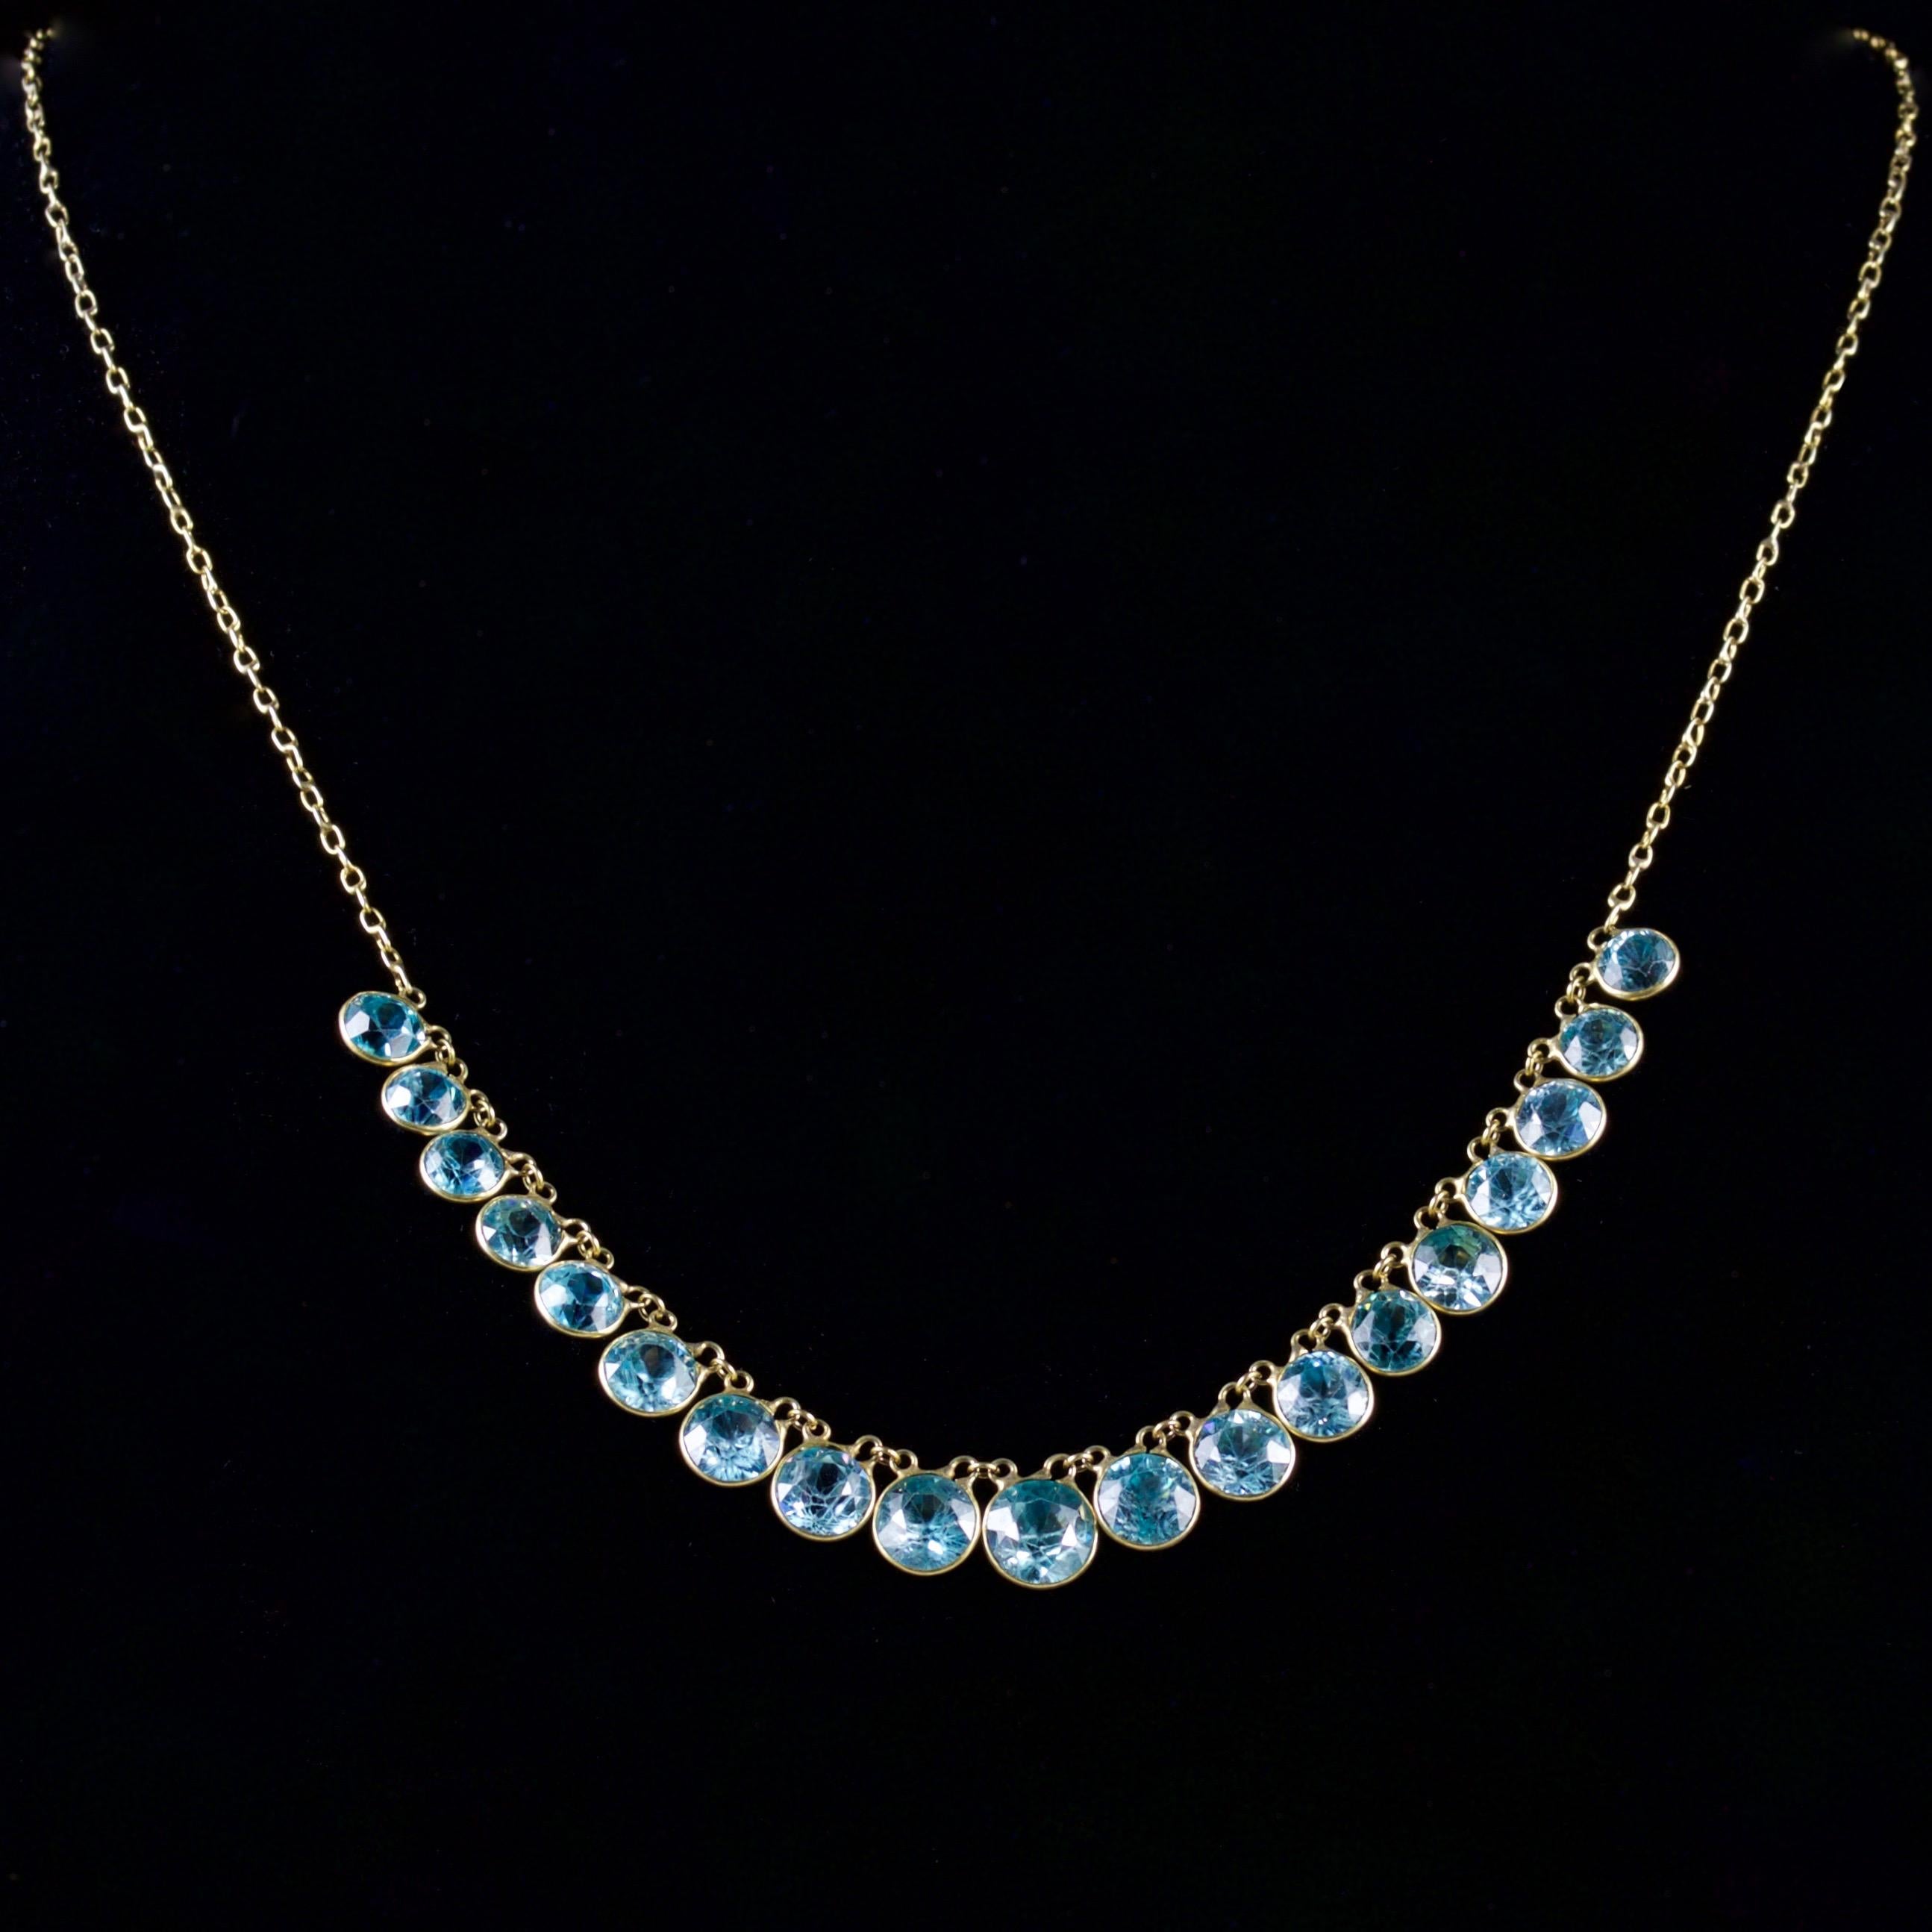 This lovely 9ct Gold Victorian necklace is Circa 1900.

The necklace boasts beautiful blue Zircons which graduate in size.

There are 18ct of bright, blue Zircons on this fabulous necklace.

Blue Zircons have an intense energy that is highly